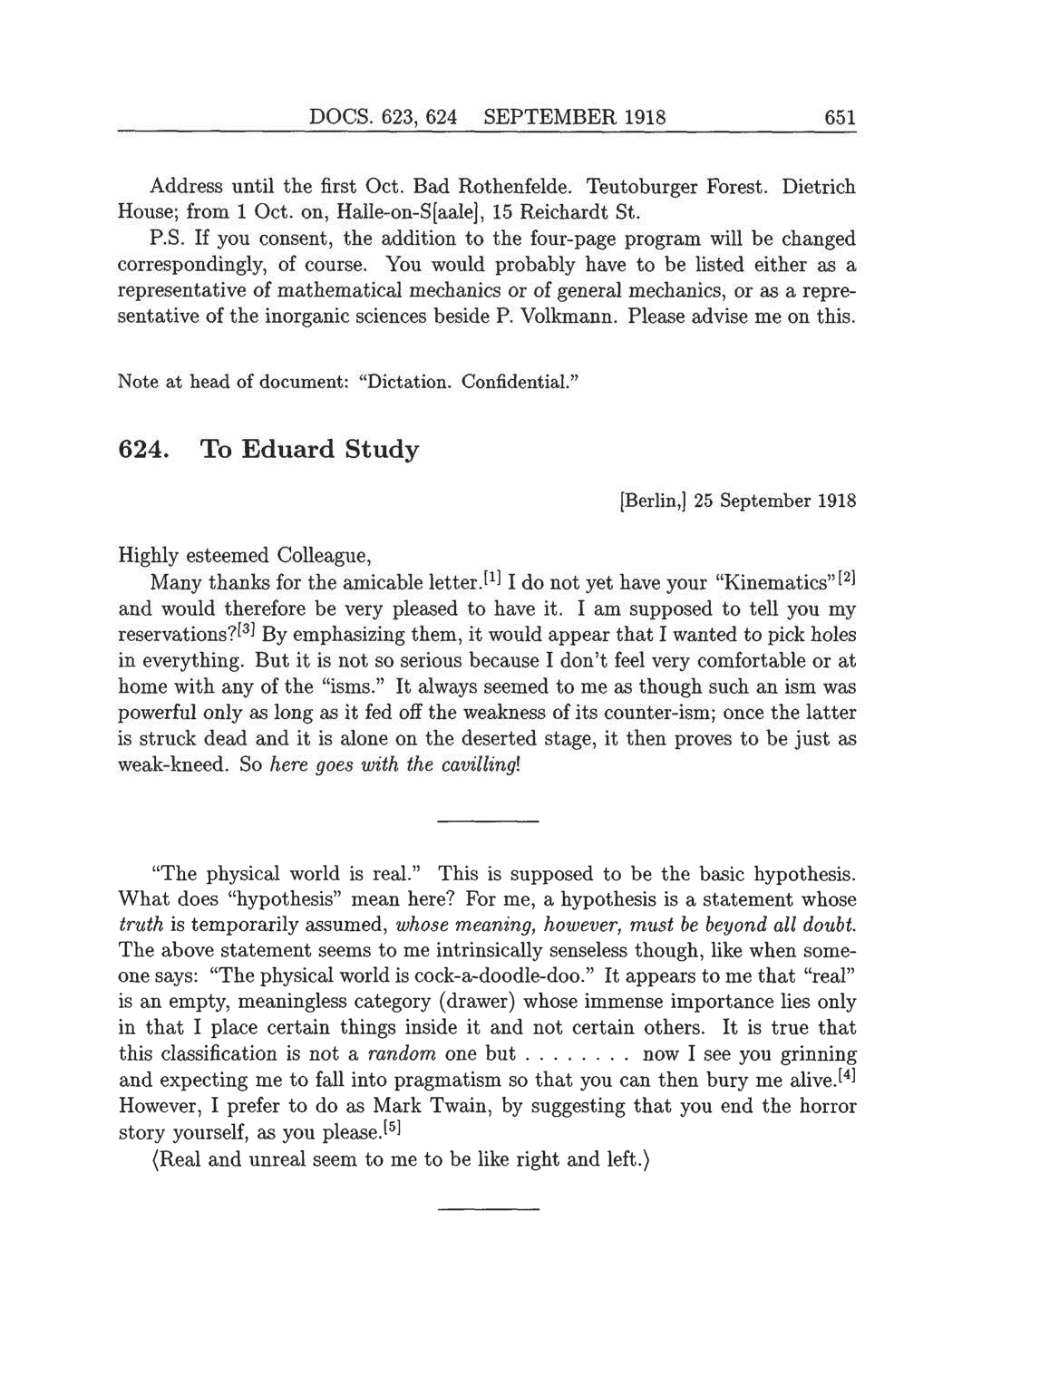 Volume 8: The Berlin Years: Correspondence, 1914-1918 (English translation supplement) page 651